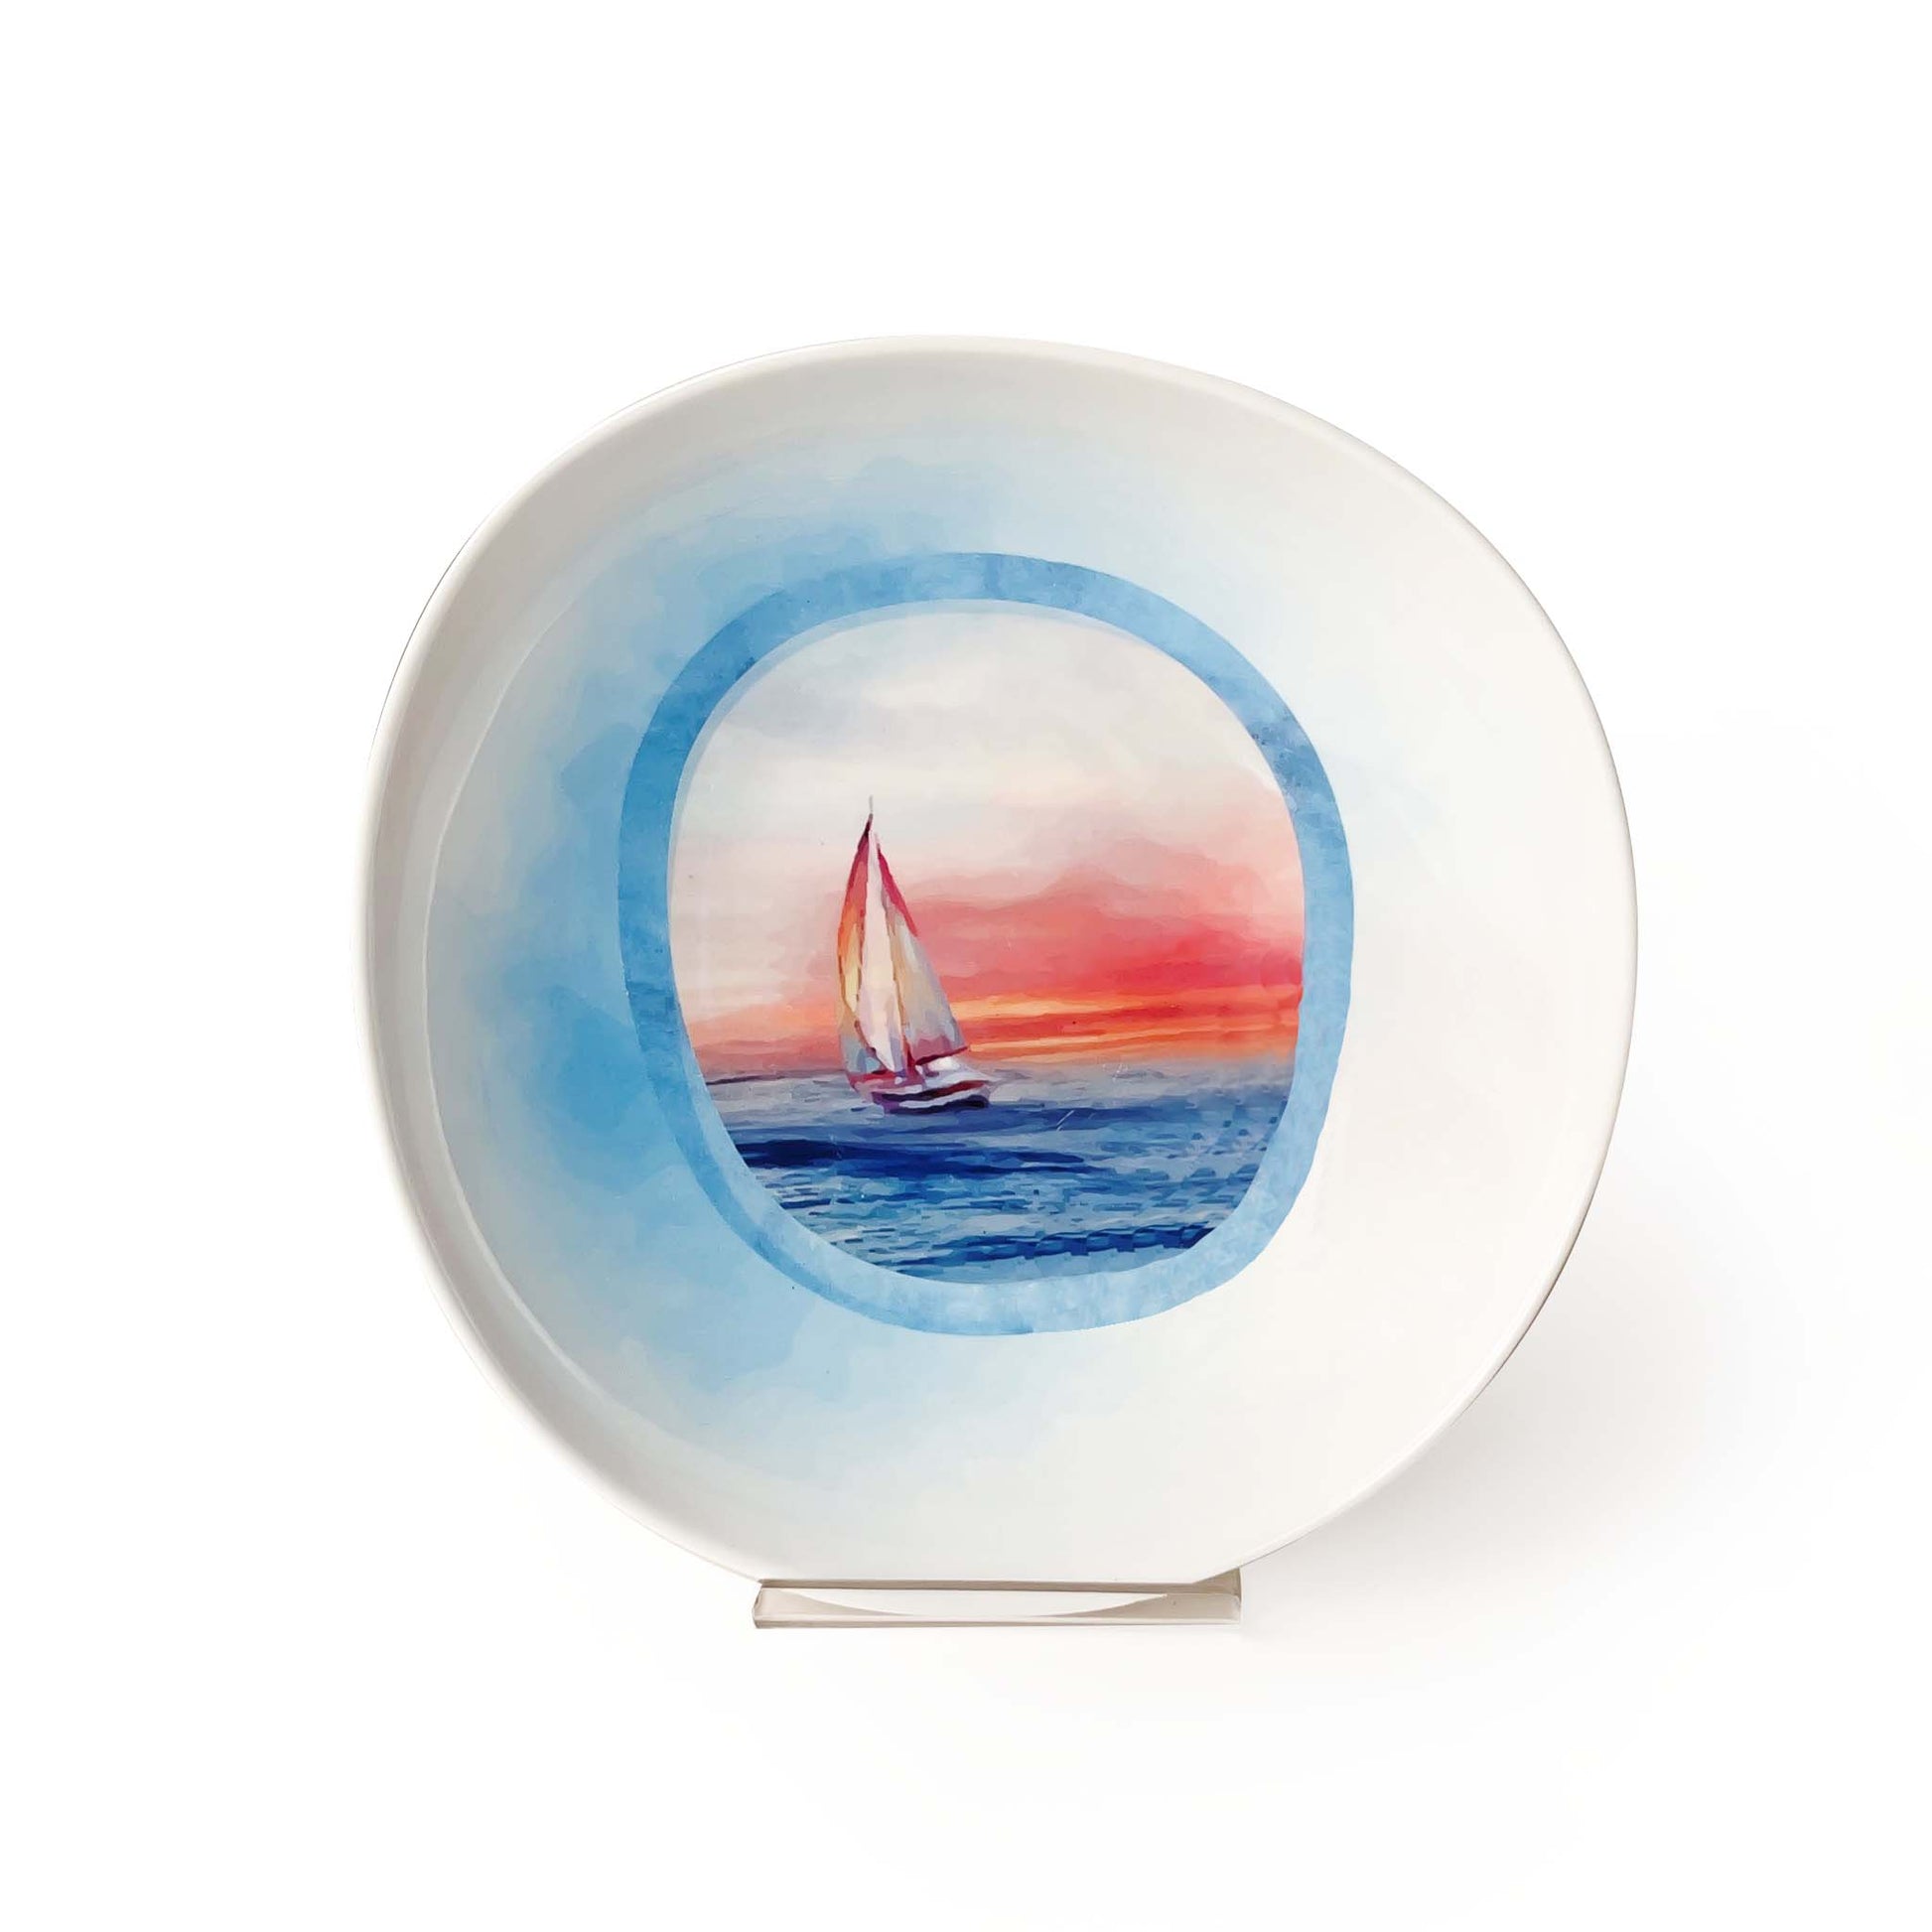 The Plate Story - 2 Pcs Salad Bowls - The Magic Hour